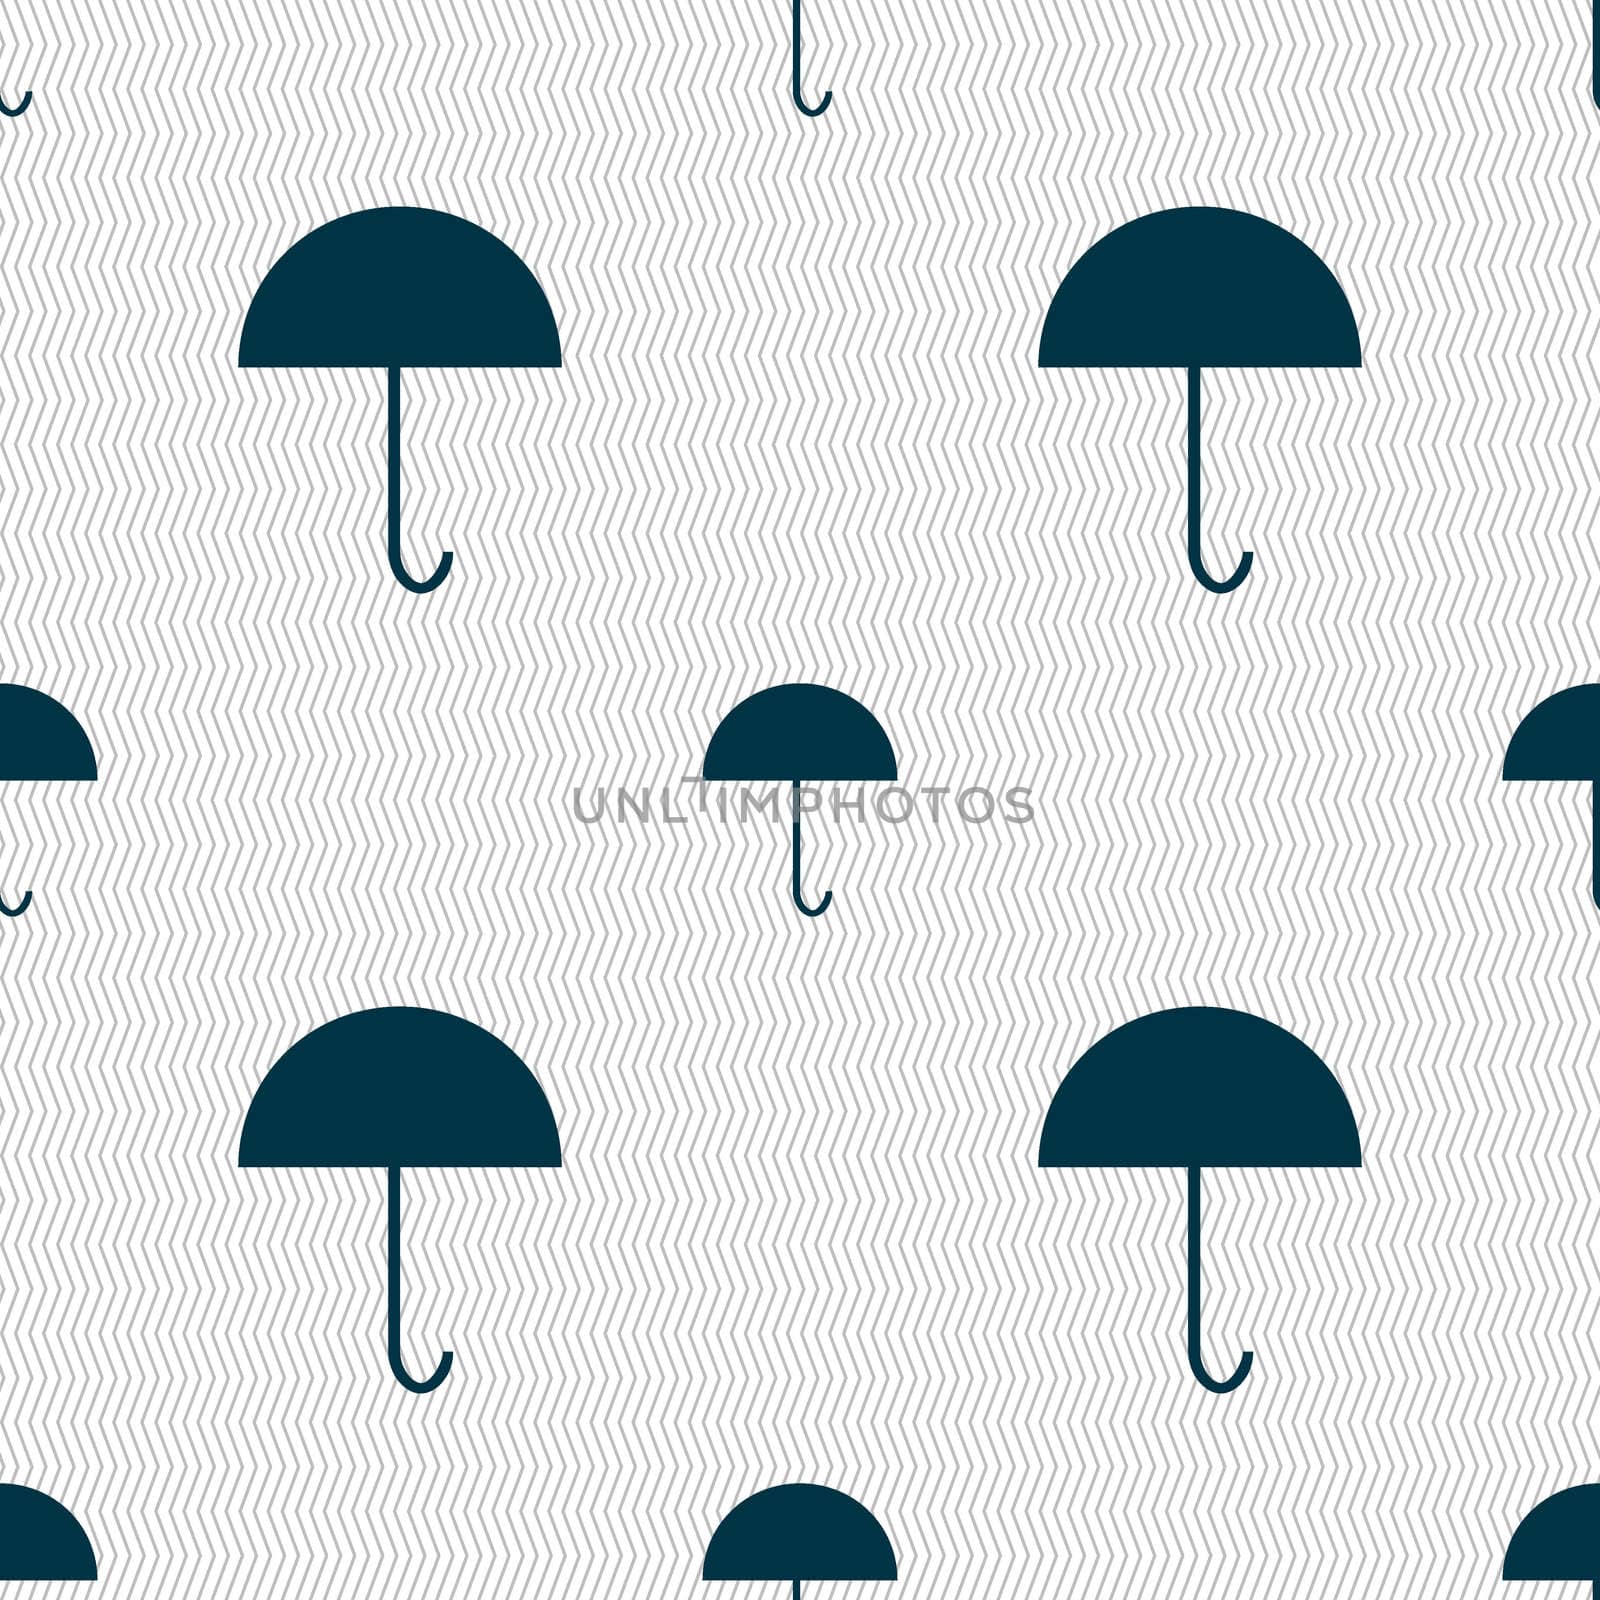 Umbrella sign icon. Rain protection symbol. Seamless abstract background with geometric shapes. illustration